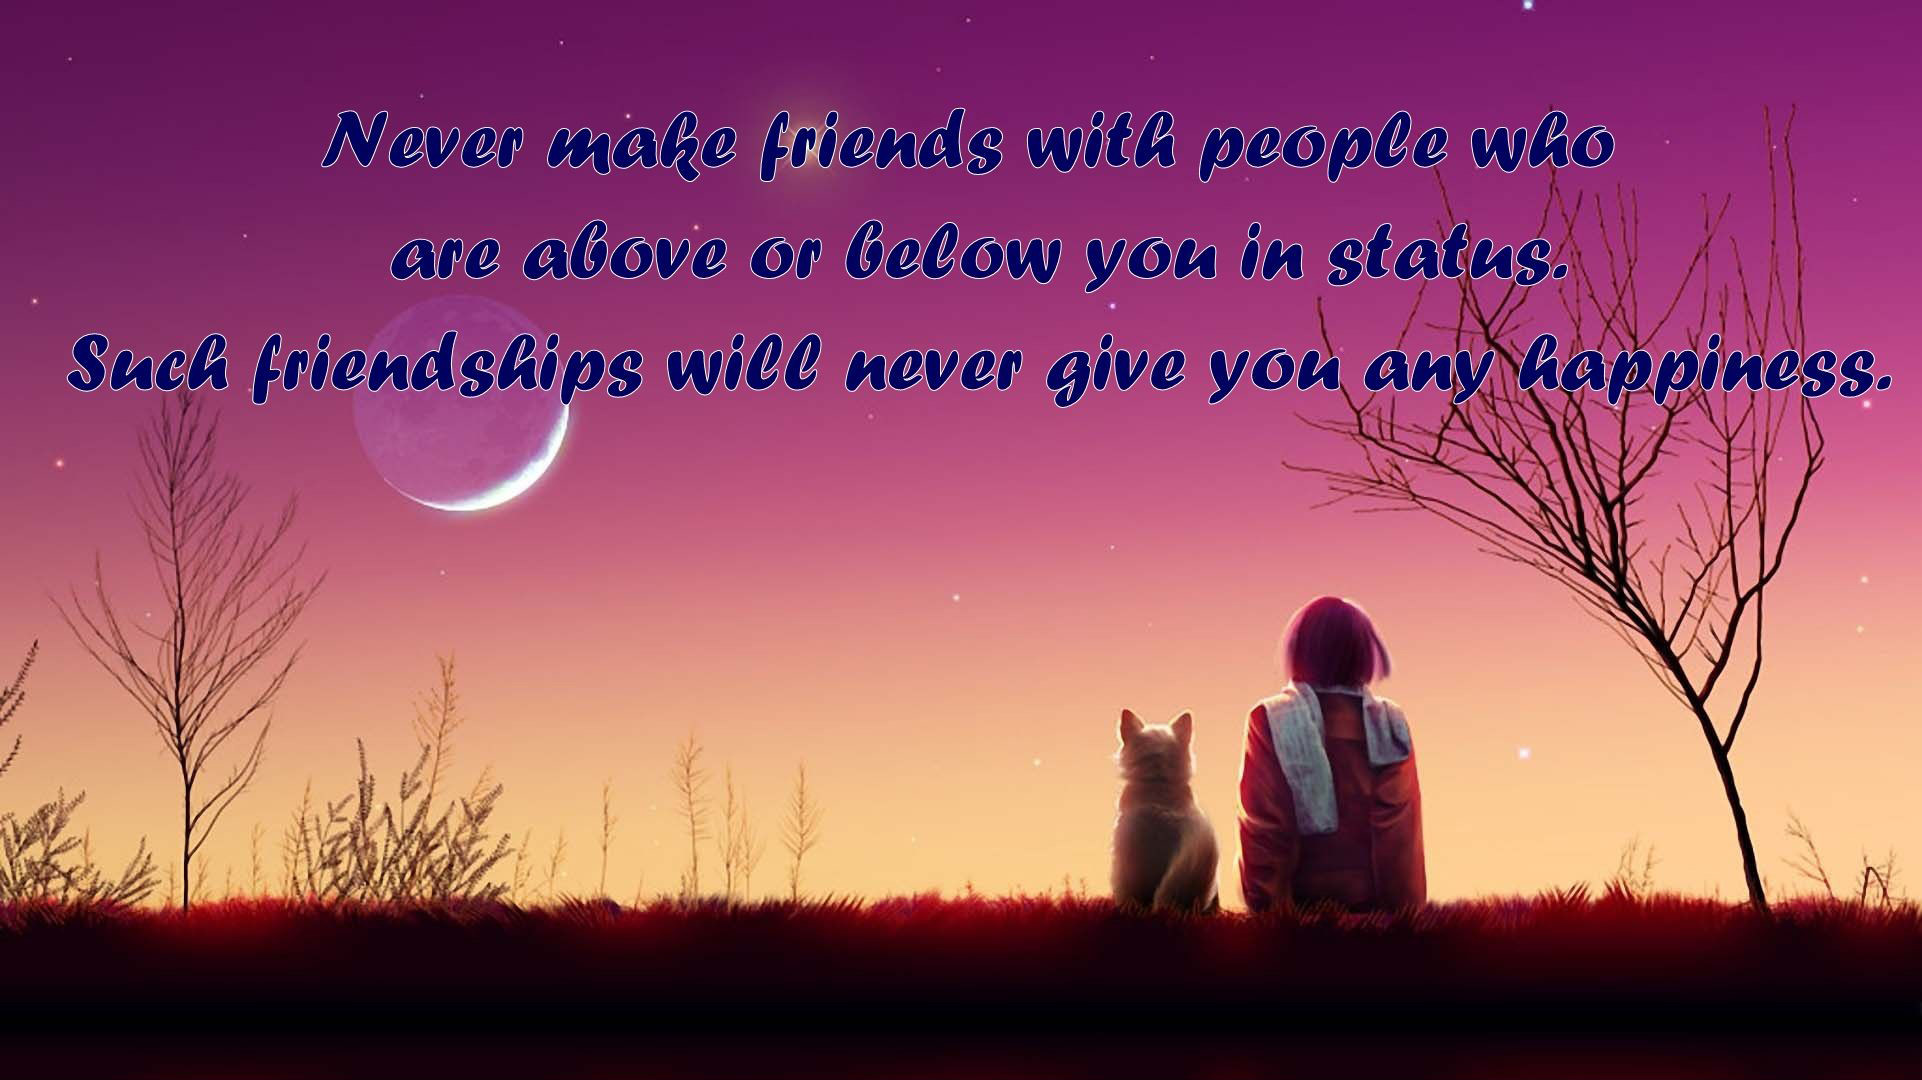 Friendship Quotes Wallpaper
 Best Friend Wallpapers 71 images